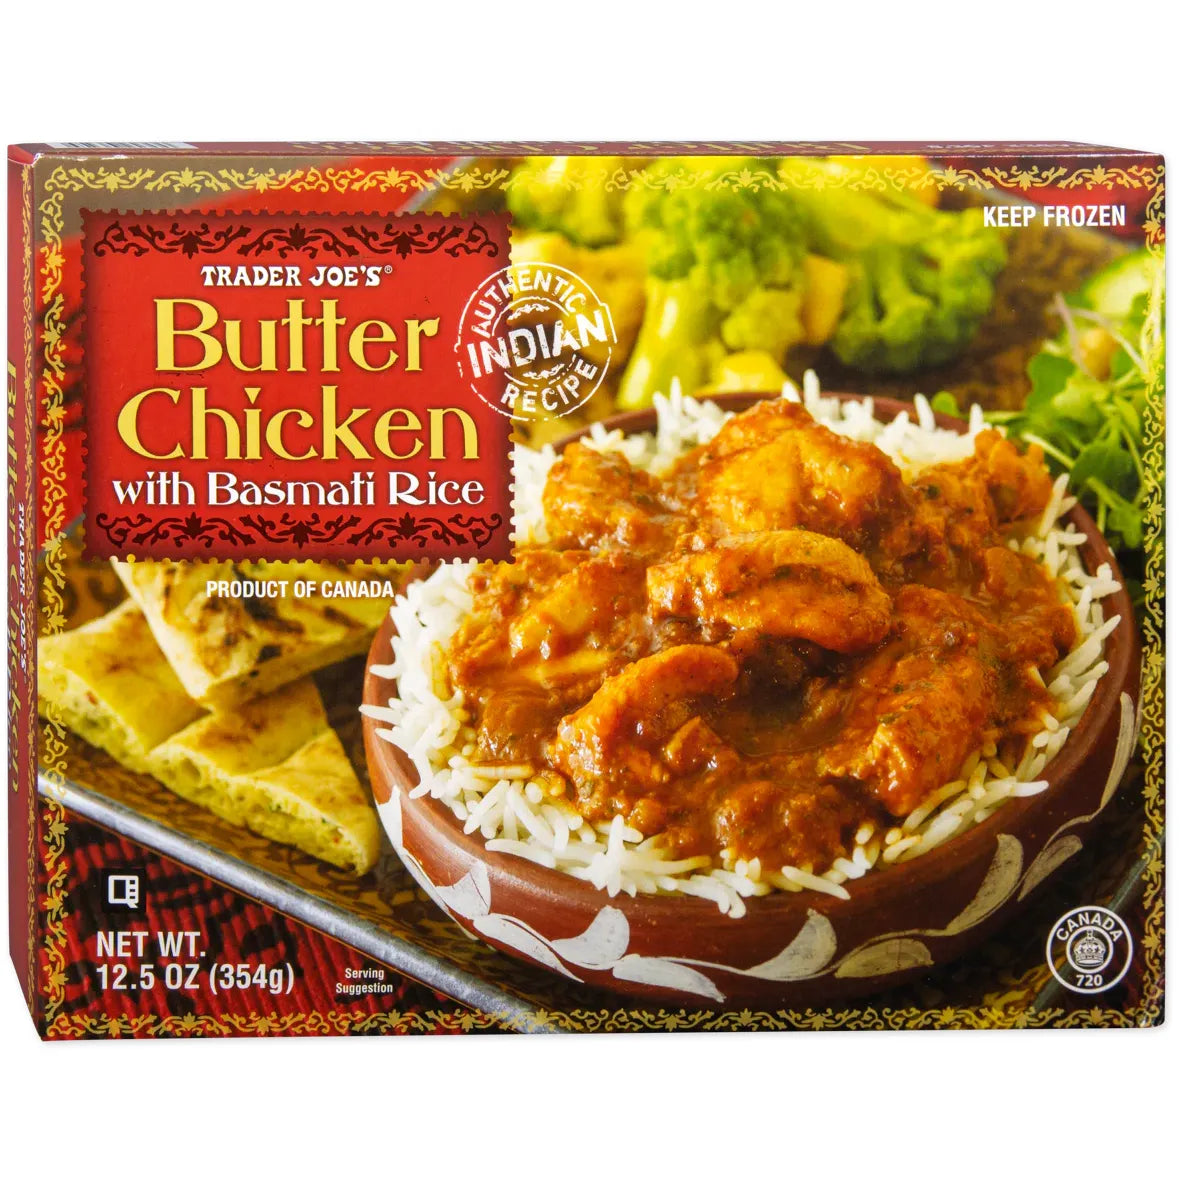 Butter Chicken with Basmati Rice